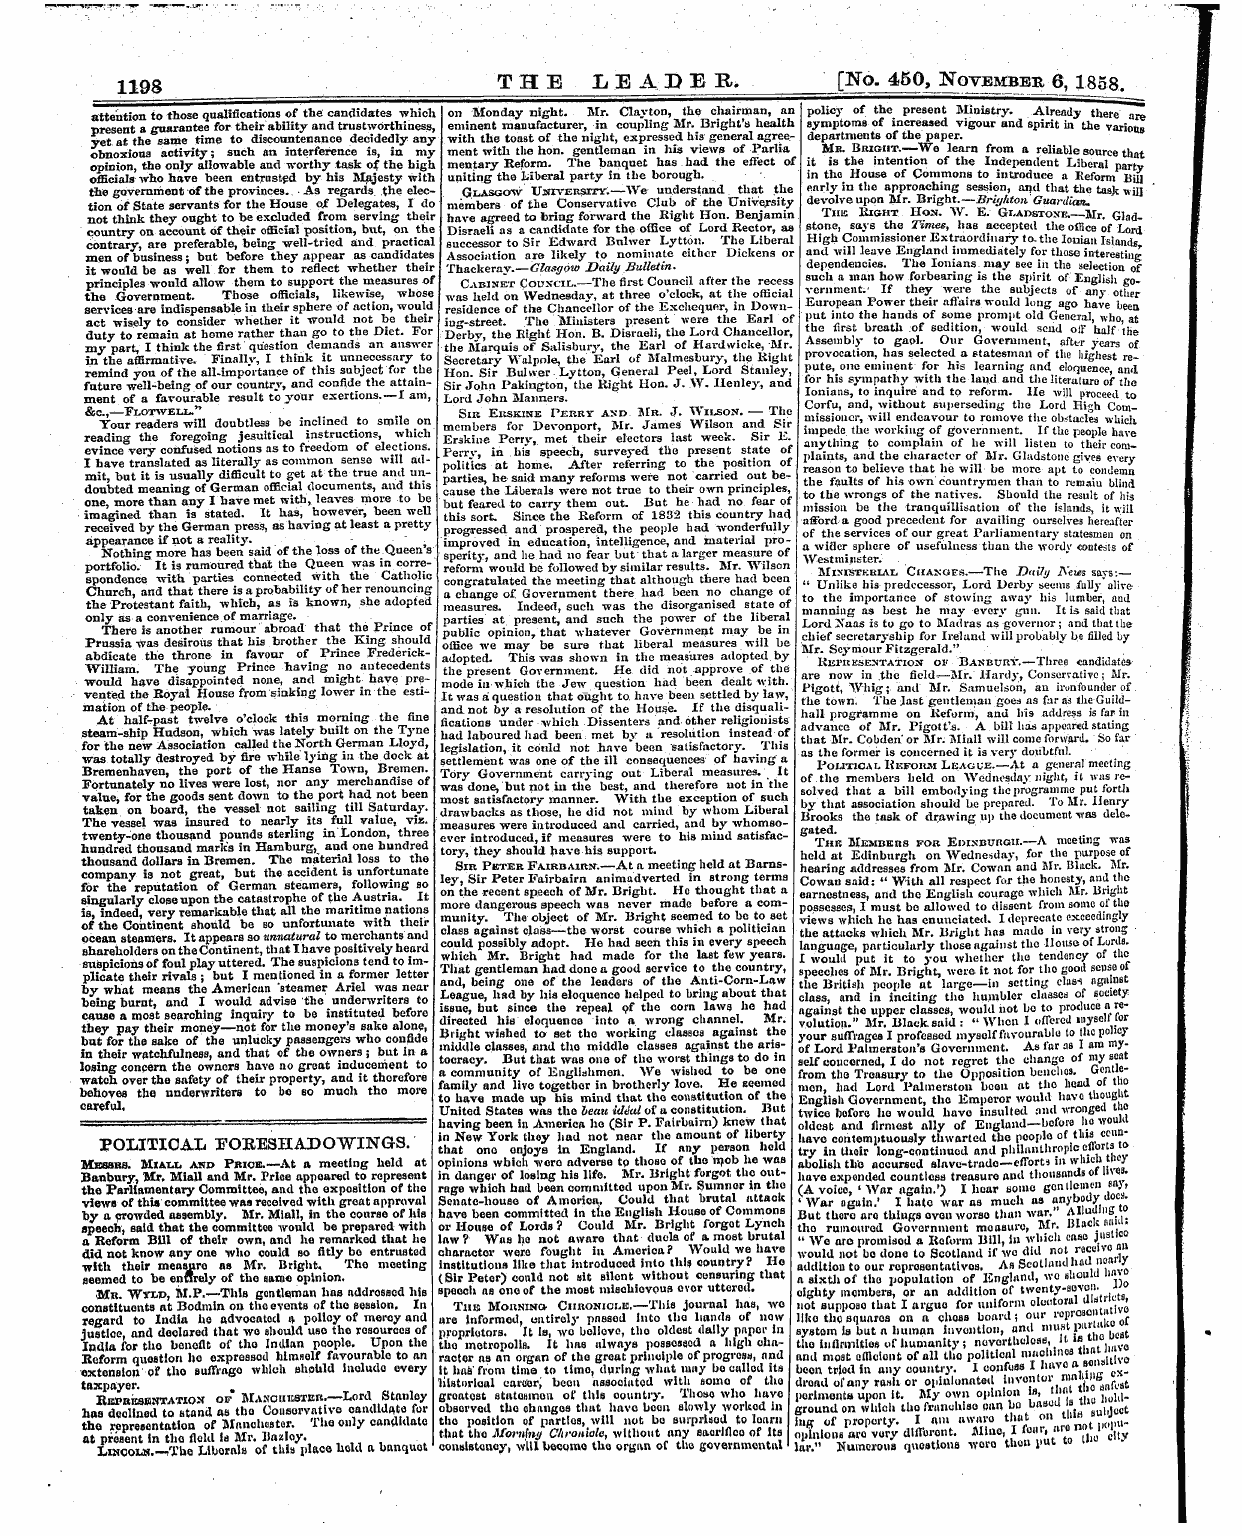 Leader (1850-1860): jS F Y, 1st edition: 22